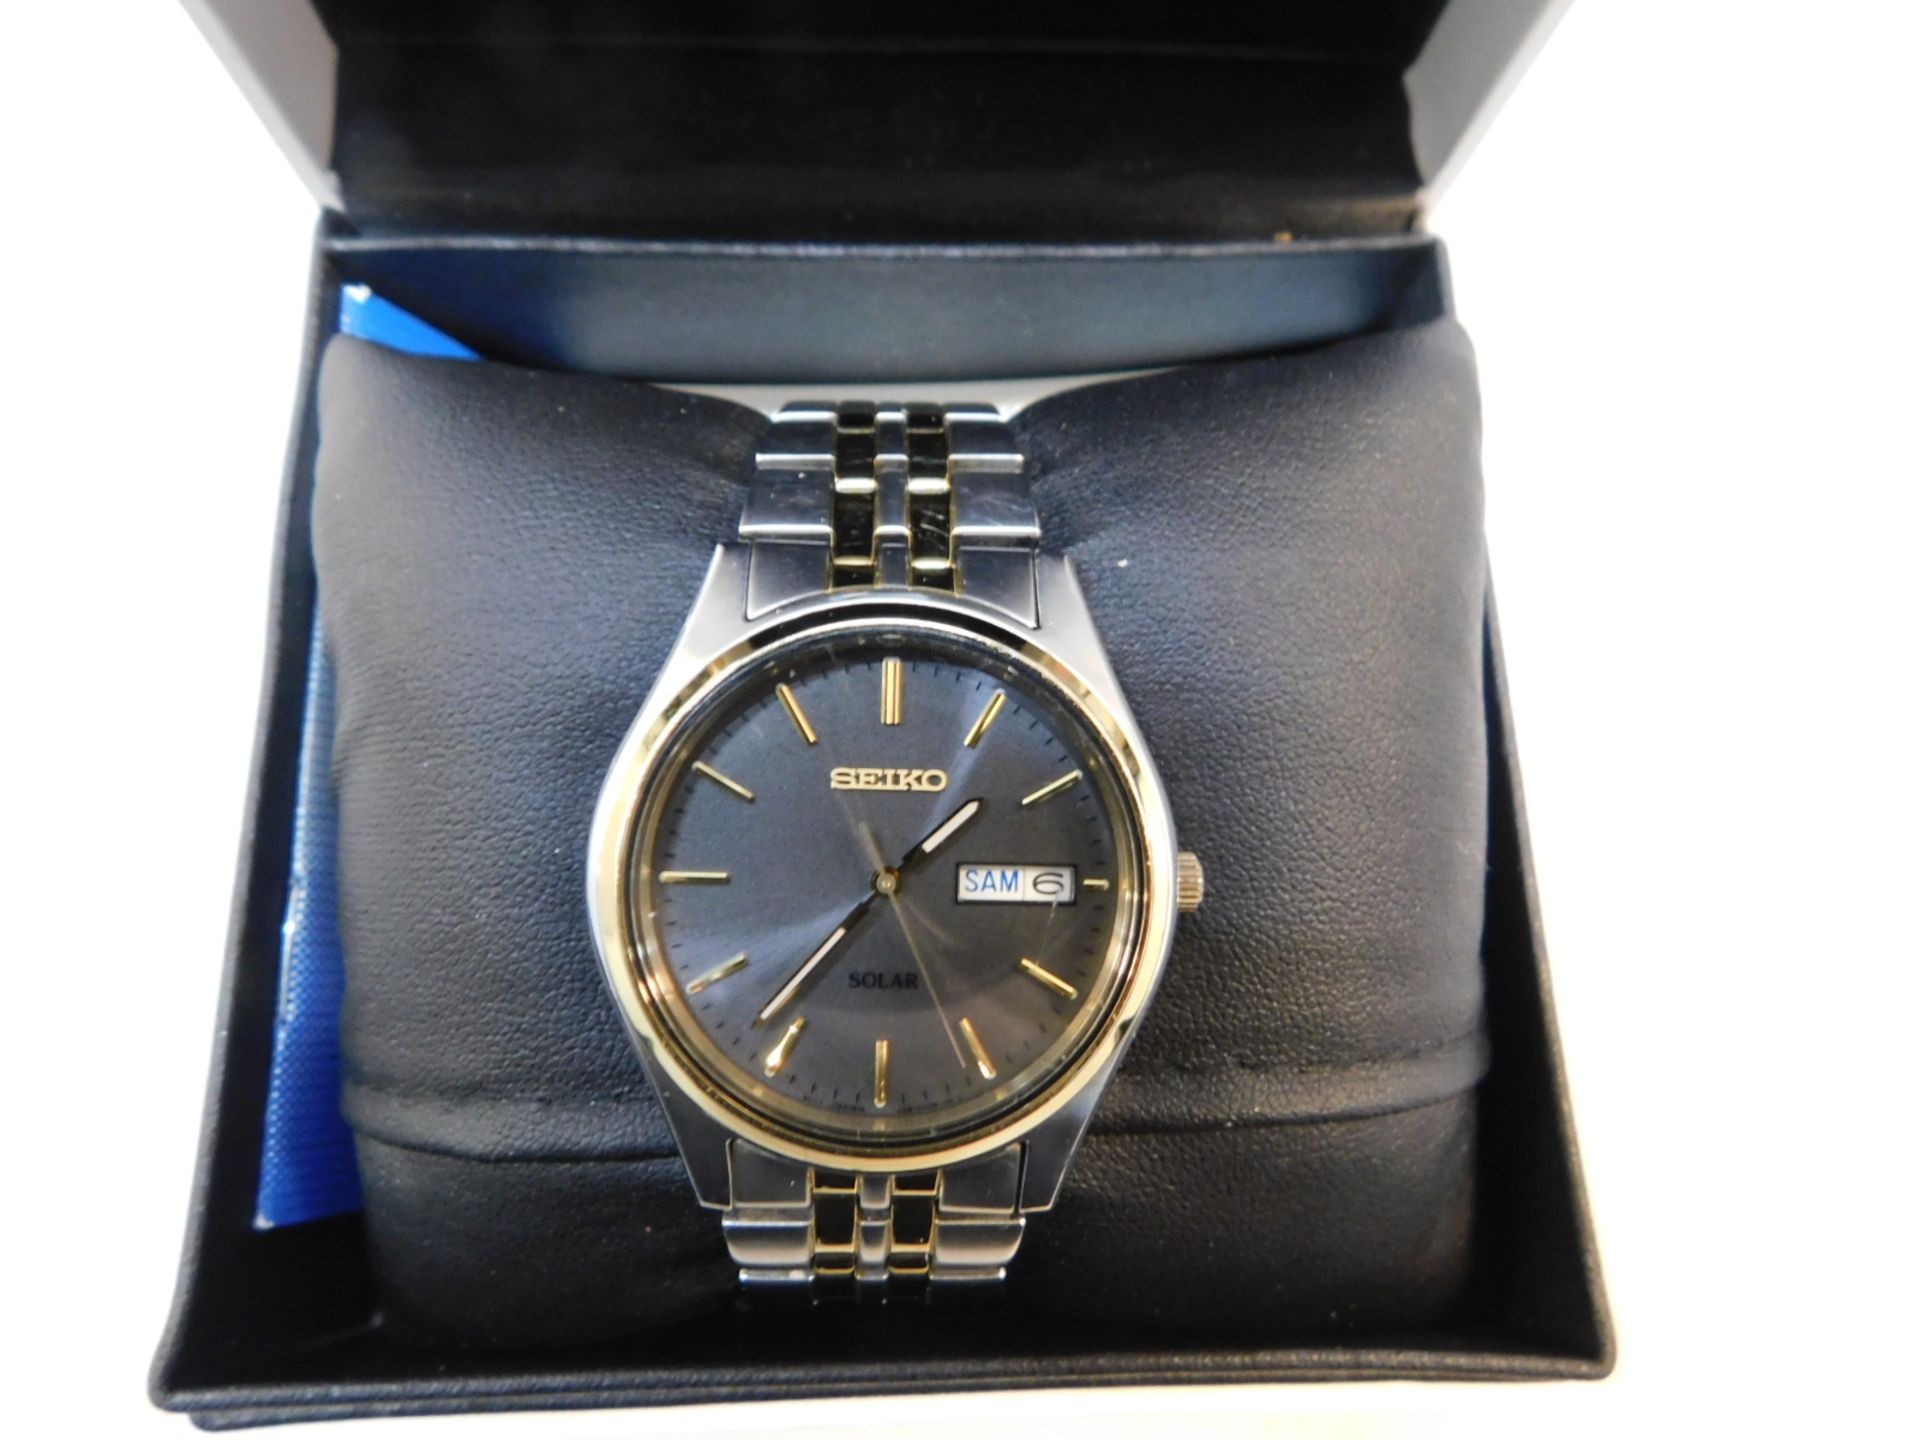 1 BOXED SEIKO GENTS SOLAR POWERED WATCH MODEL SNE042P9 RRP Â£199